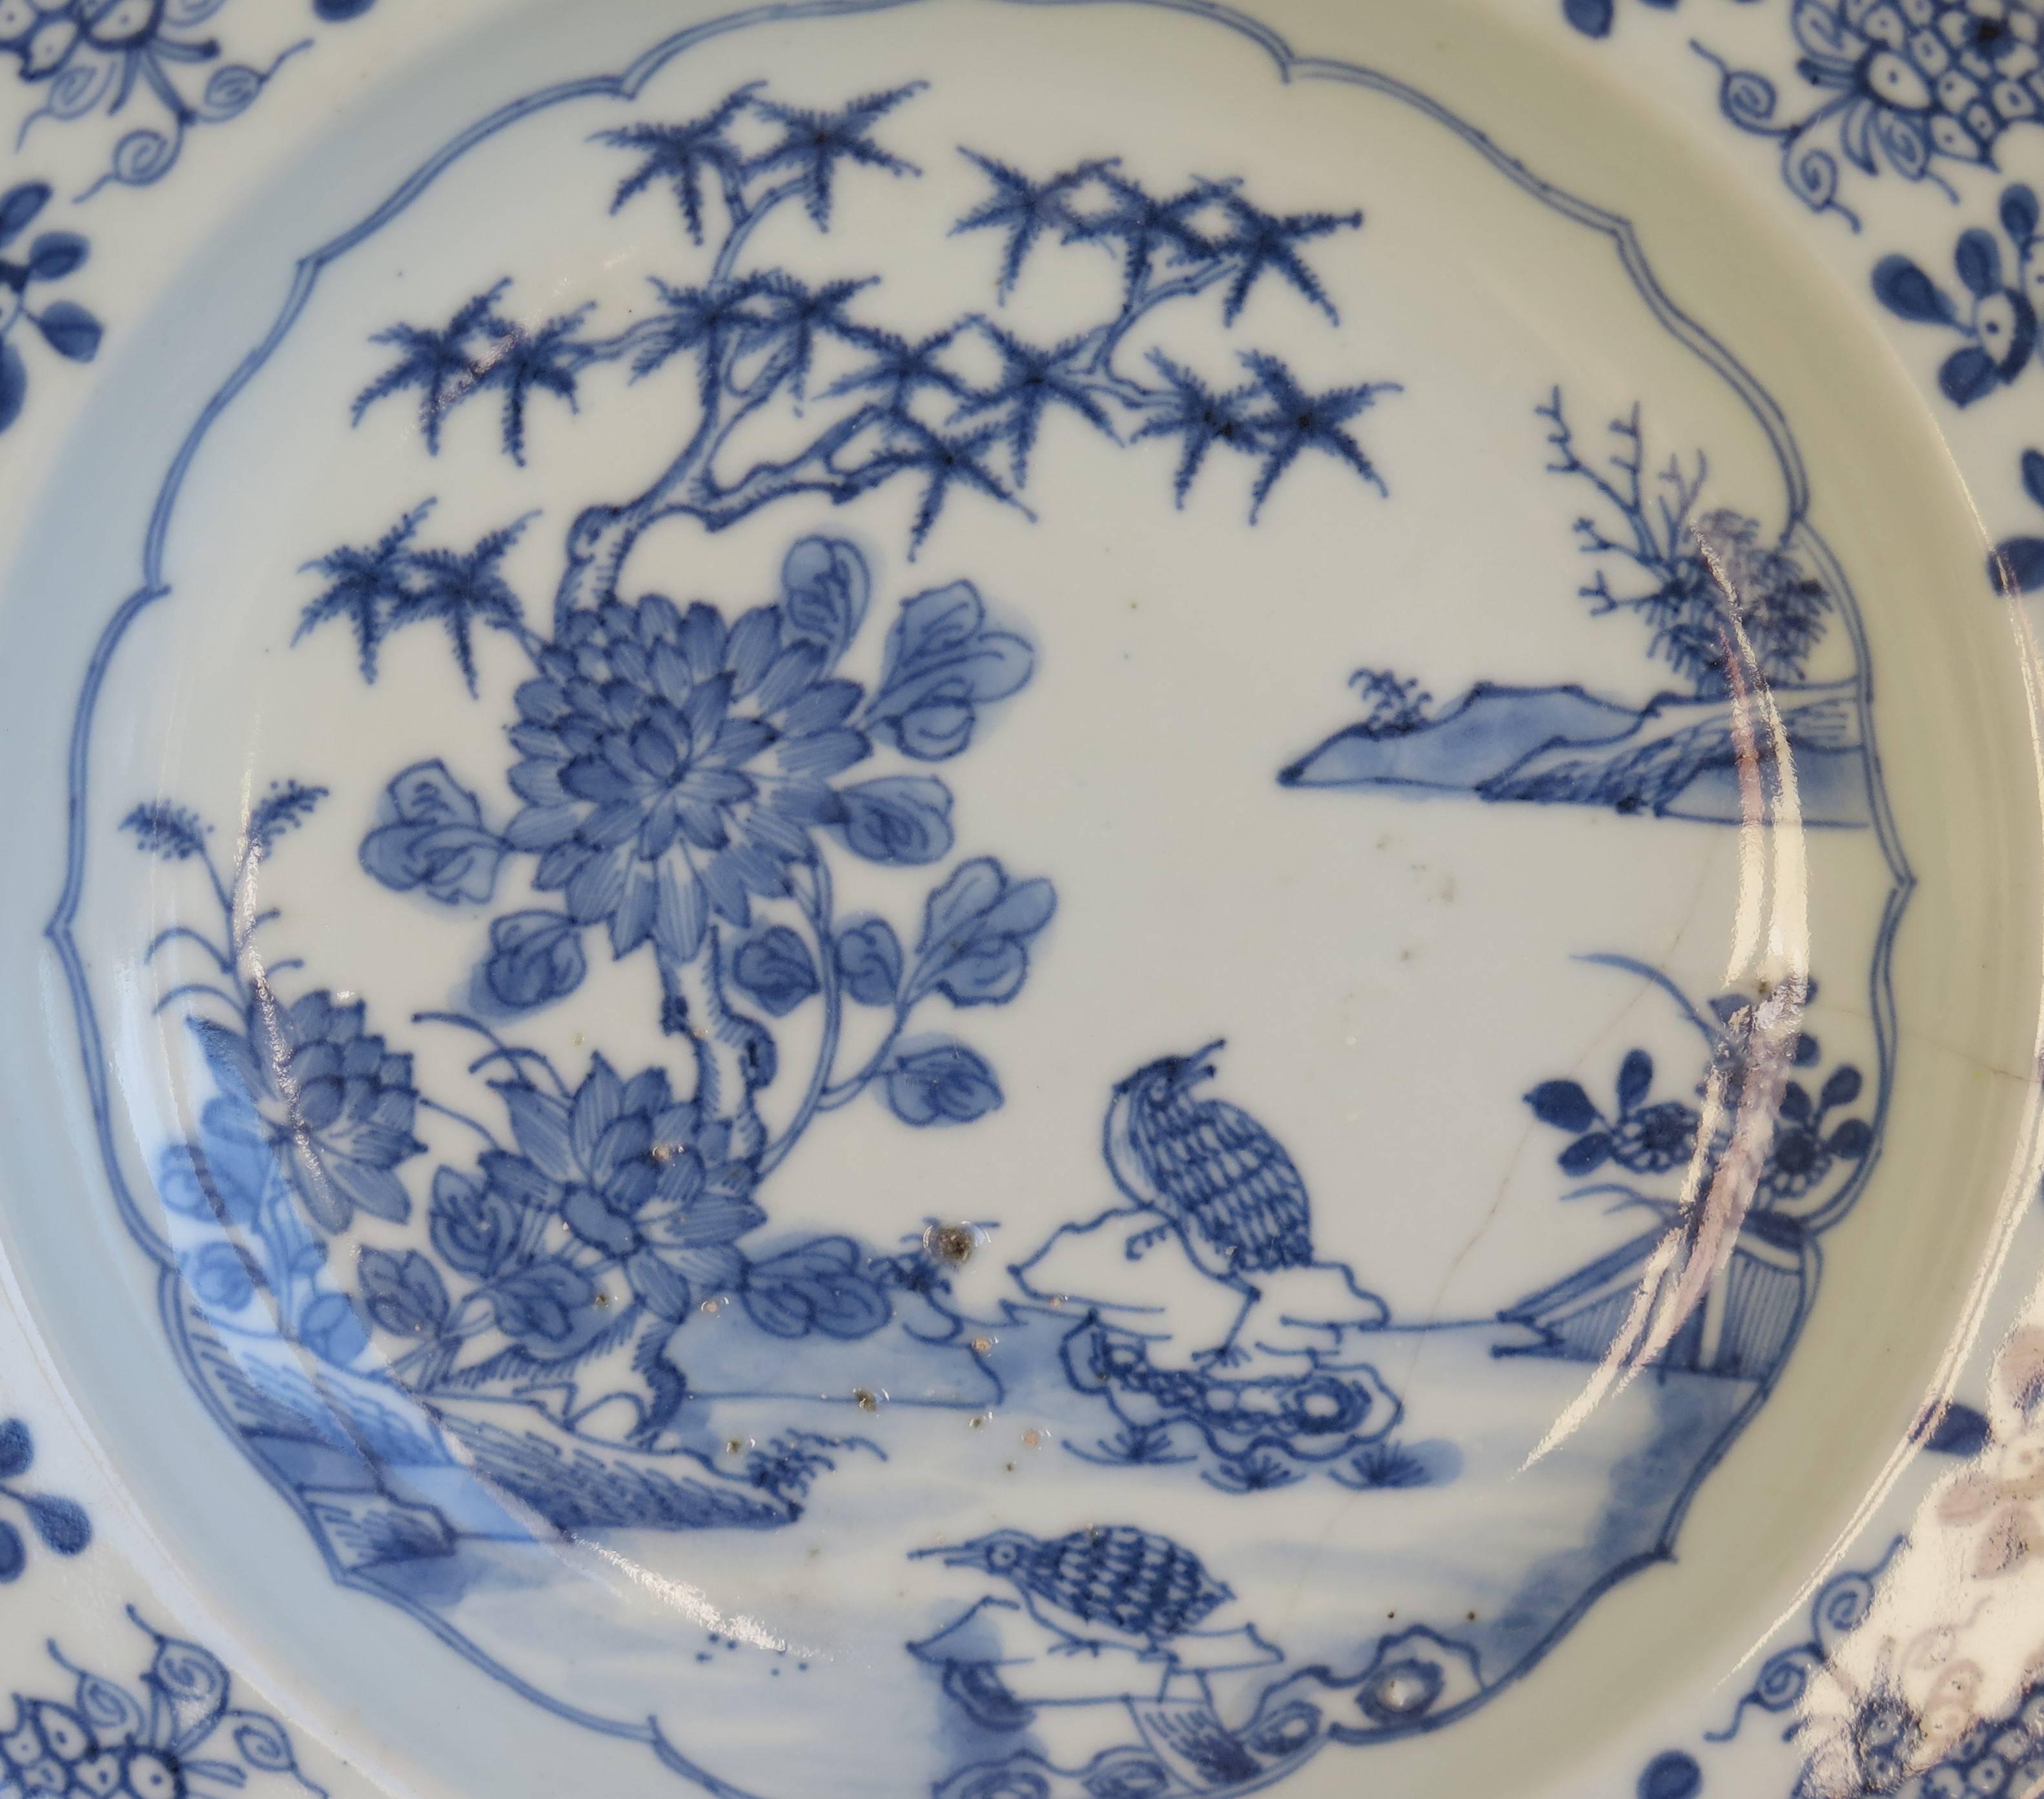 Qing Chinese Porcelain Plate or Bowl, Blue and White, Woodland Birds, circa 1770